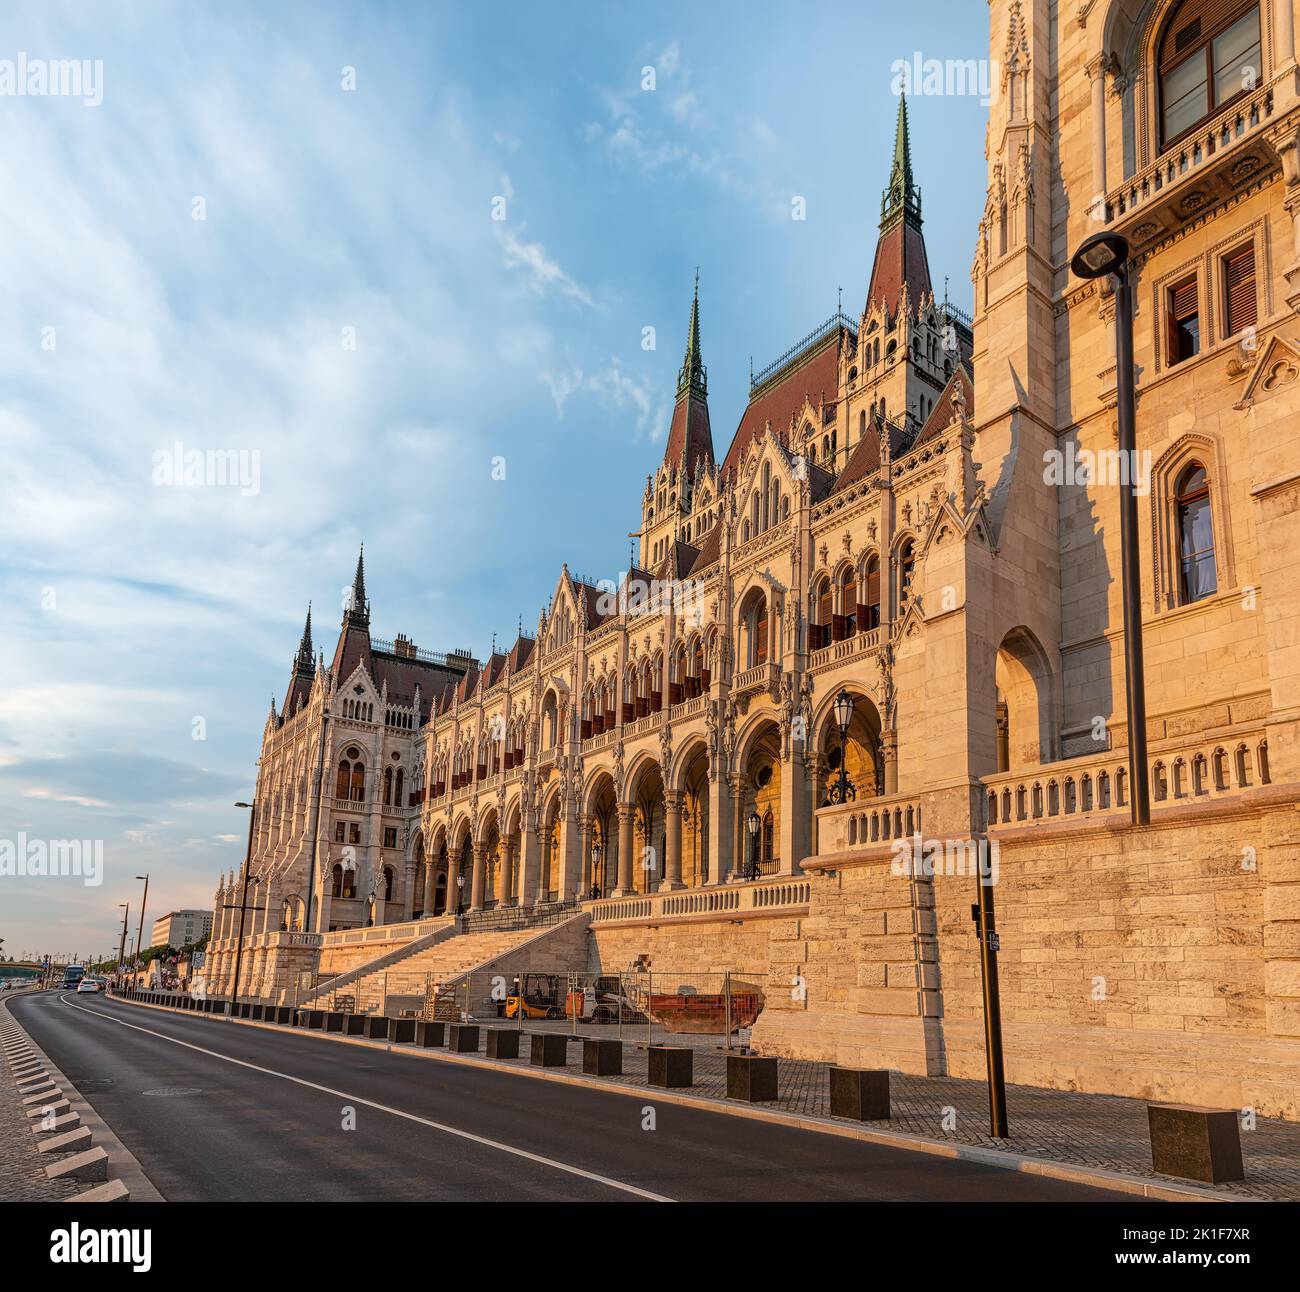 Facade of Hungarian Parliament in Budapest illuminated at sunset Stock Photo